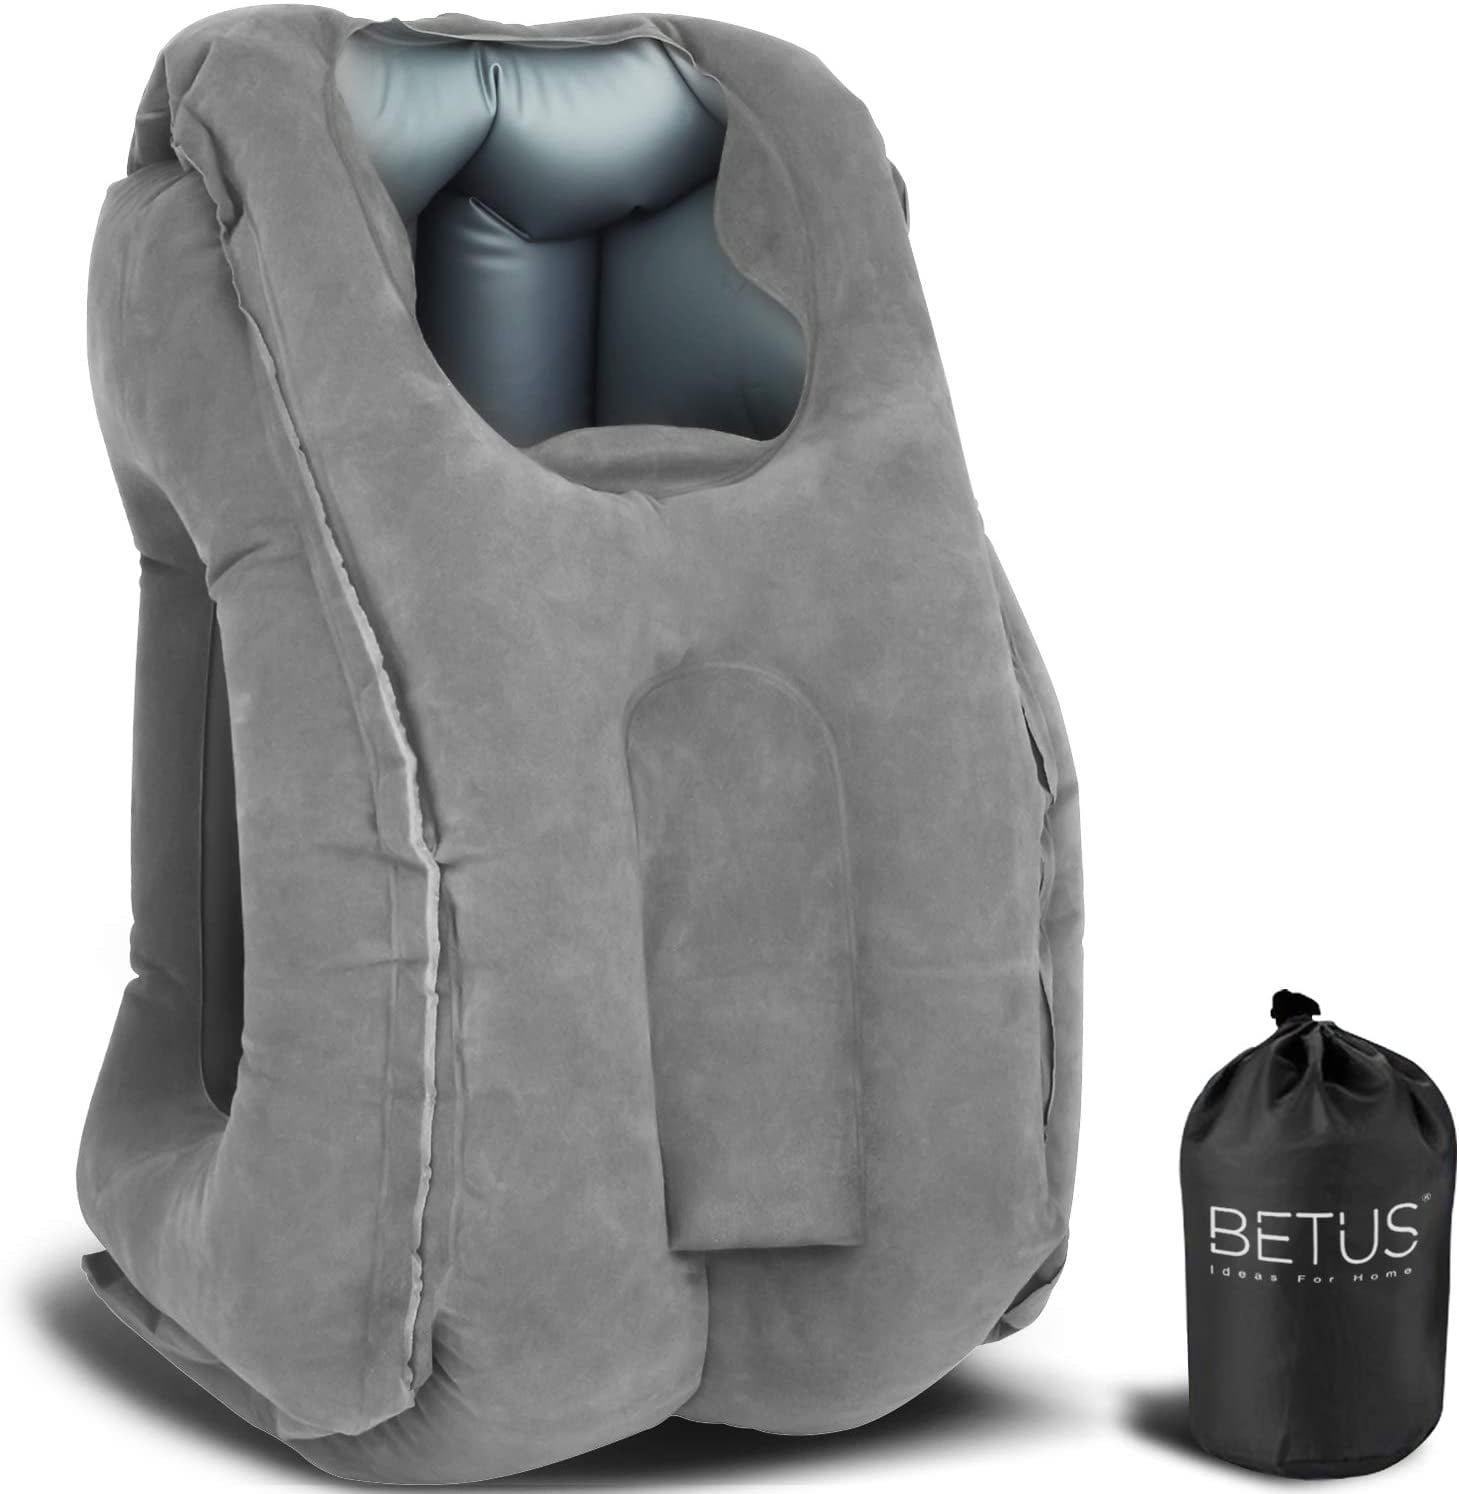 Betus Comfort Inflatable Travel Pillow for Airplane - Neck Head Rest Pillow